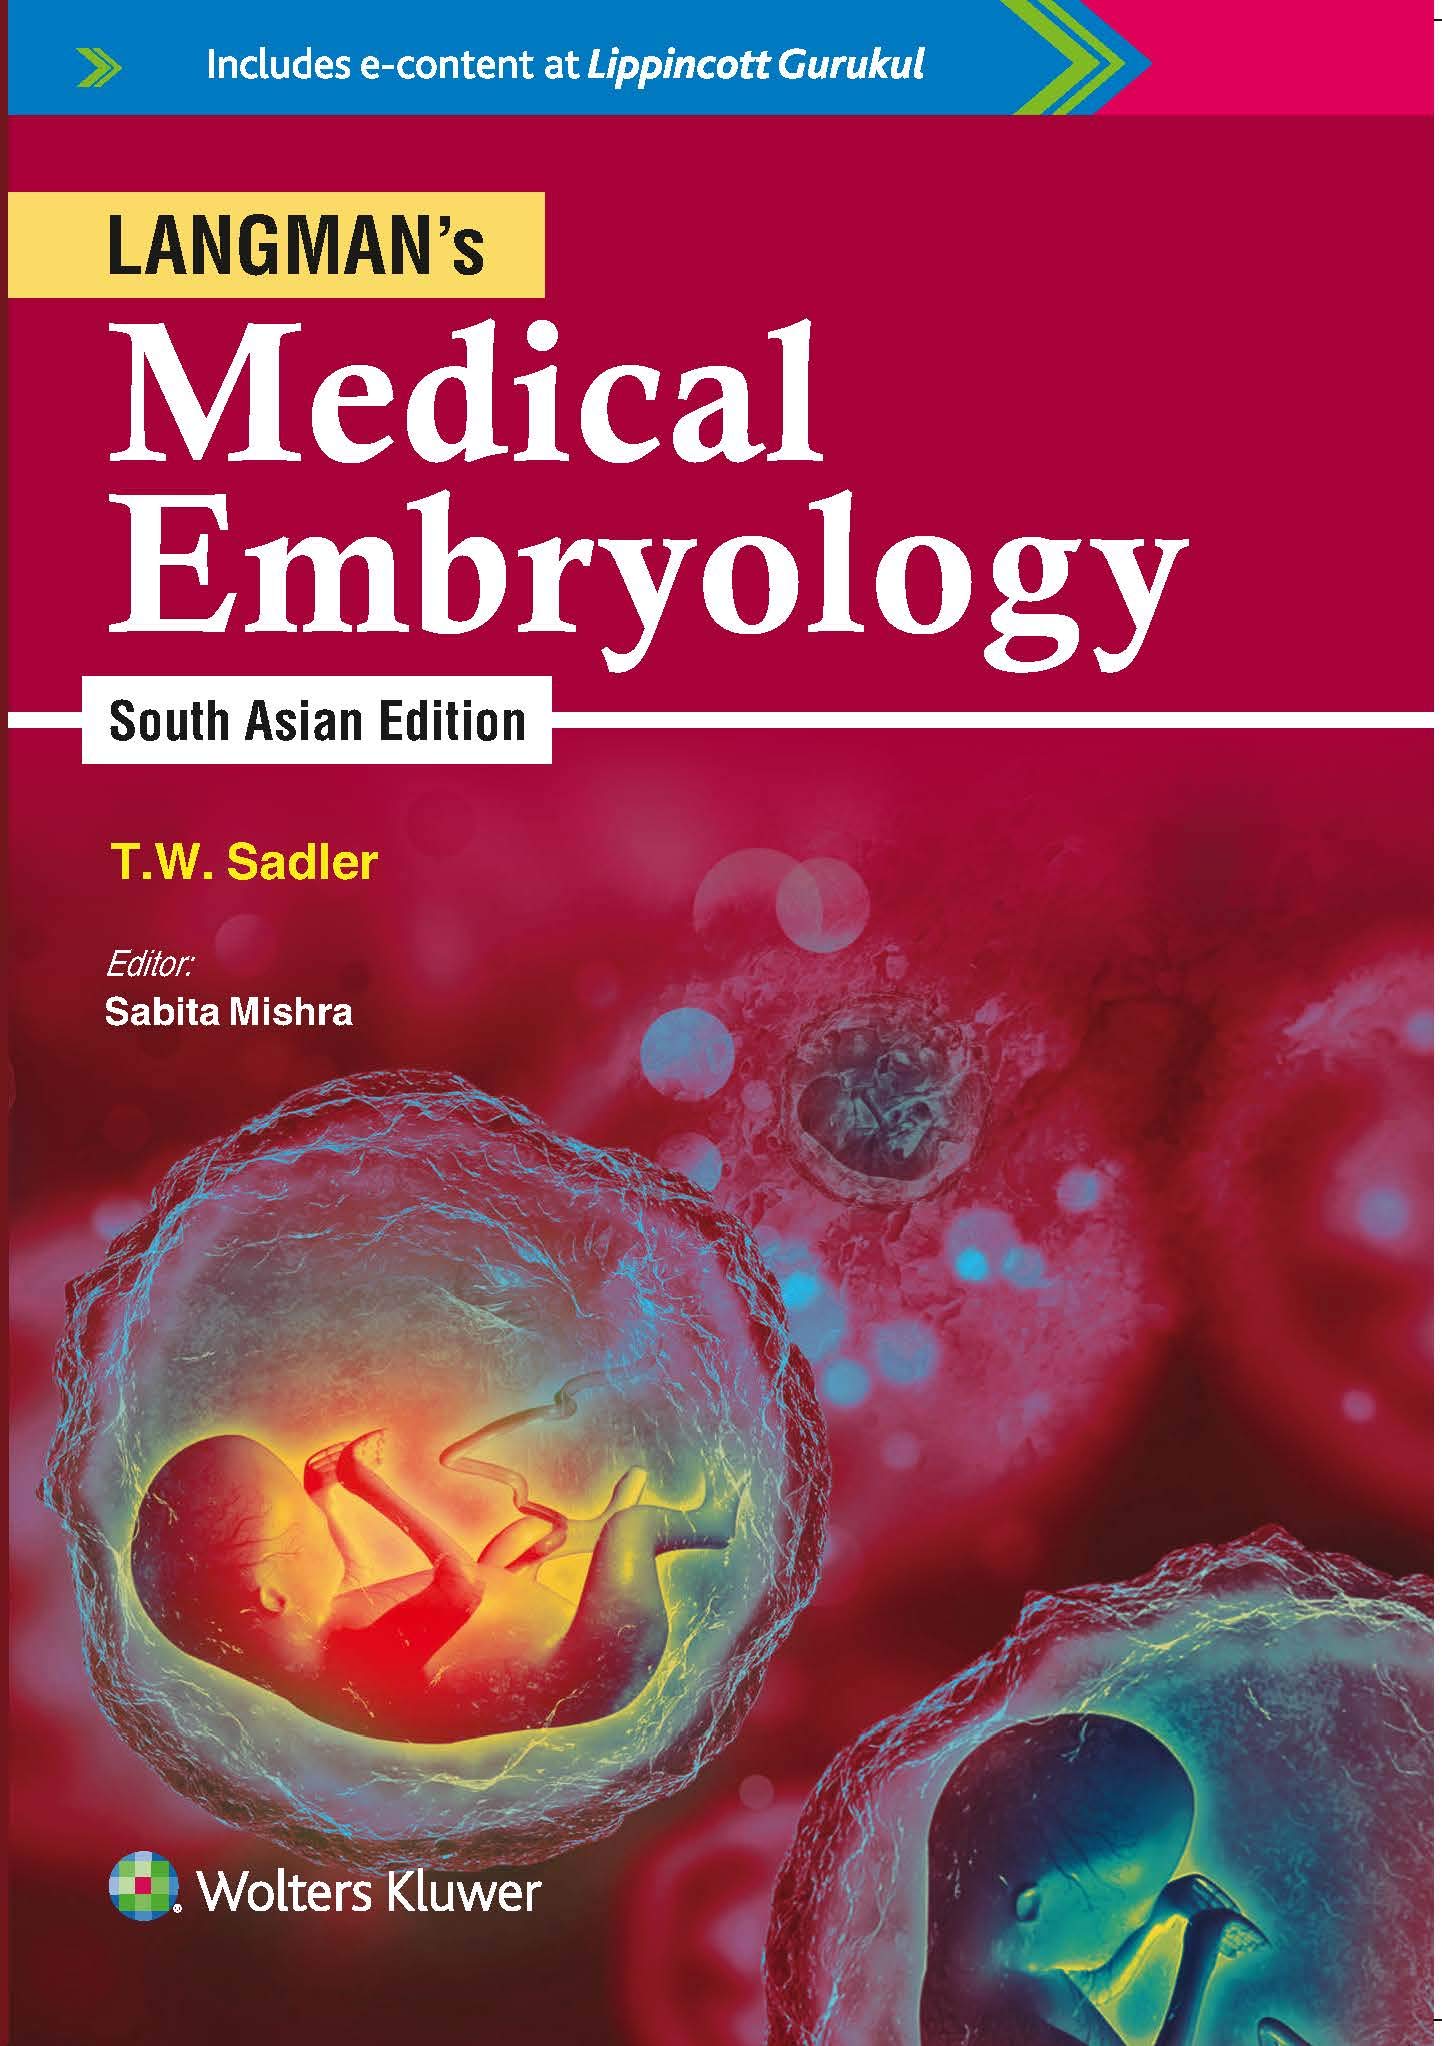 Langman's Medical Embryology, South Asia Edition  (Old Edition)